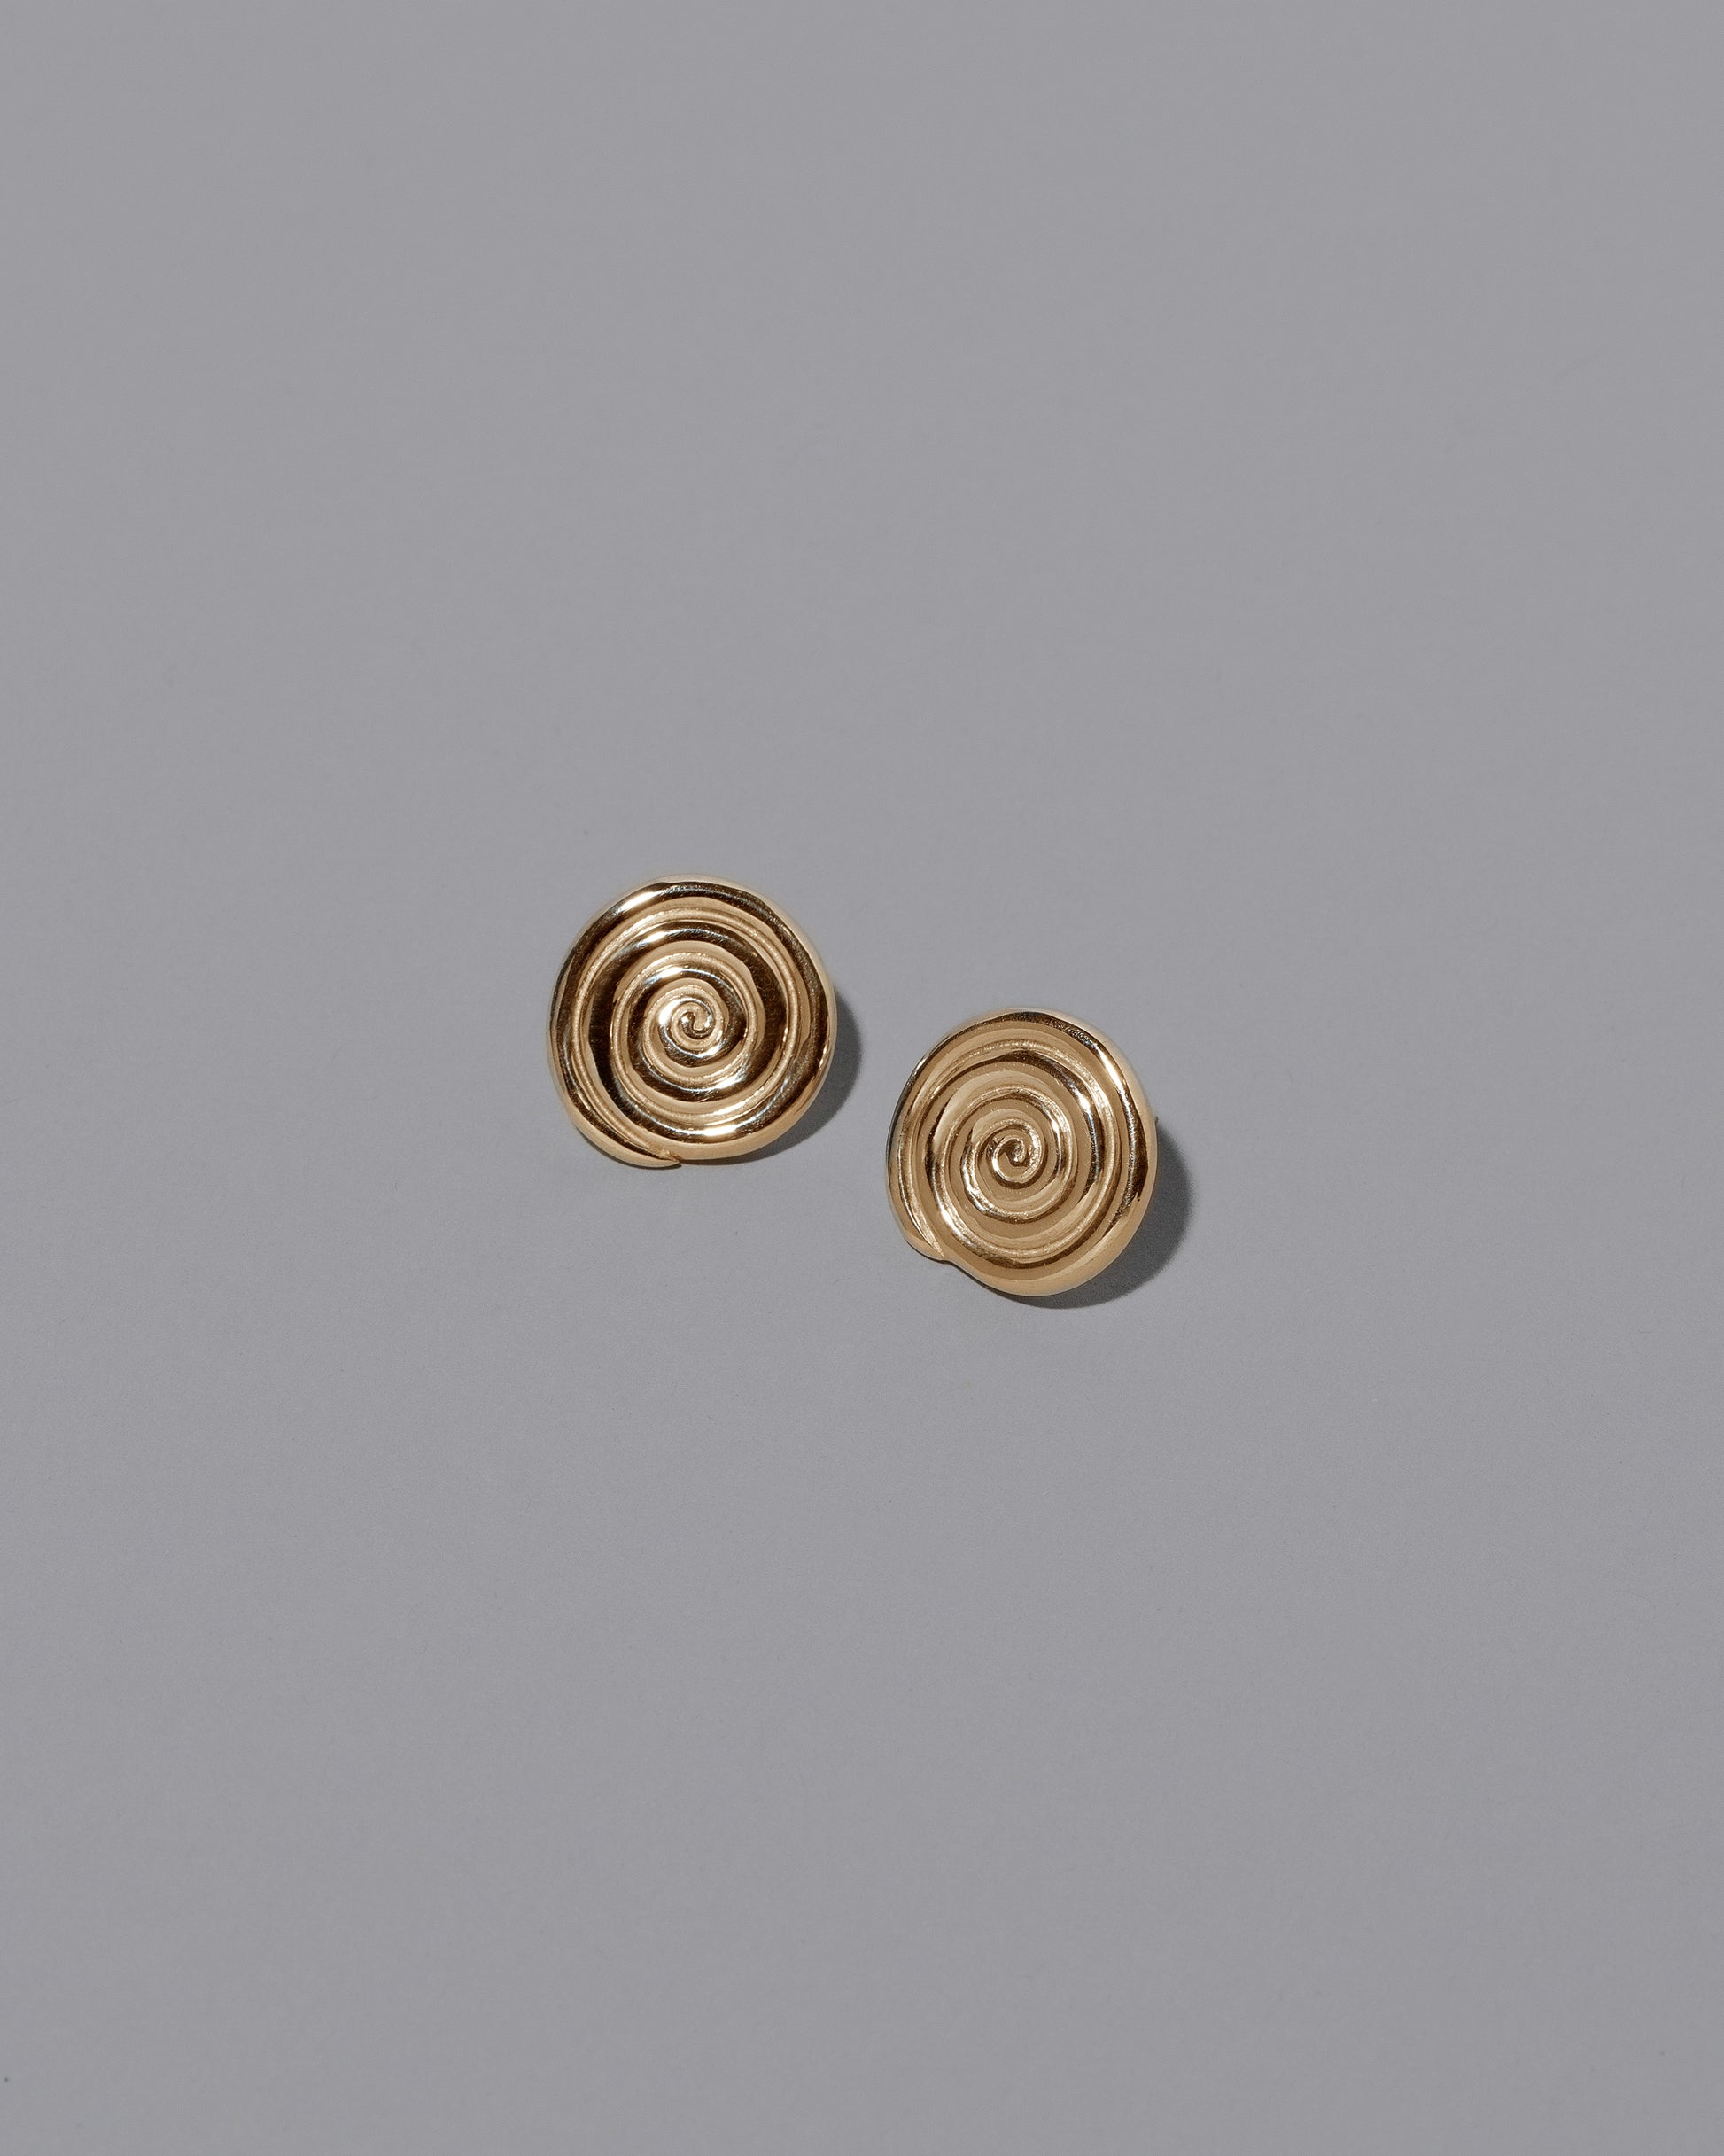 CRZM 22k Gold Serpentinite Stud Earrings on light color background.